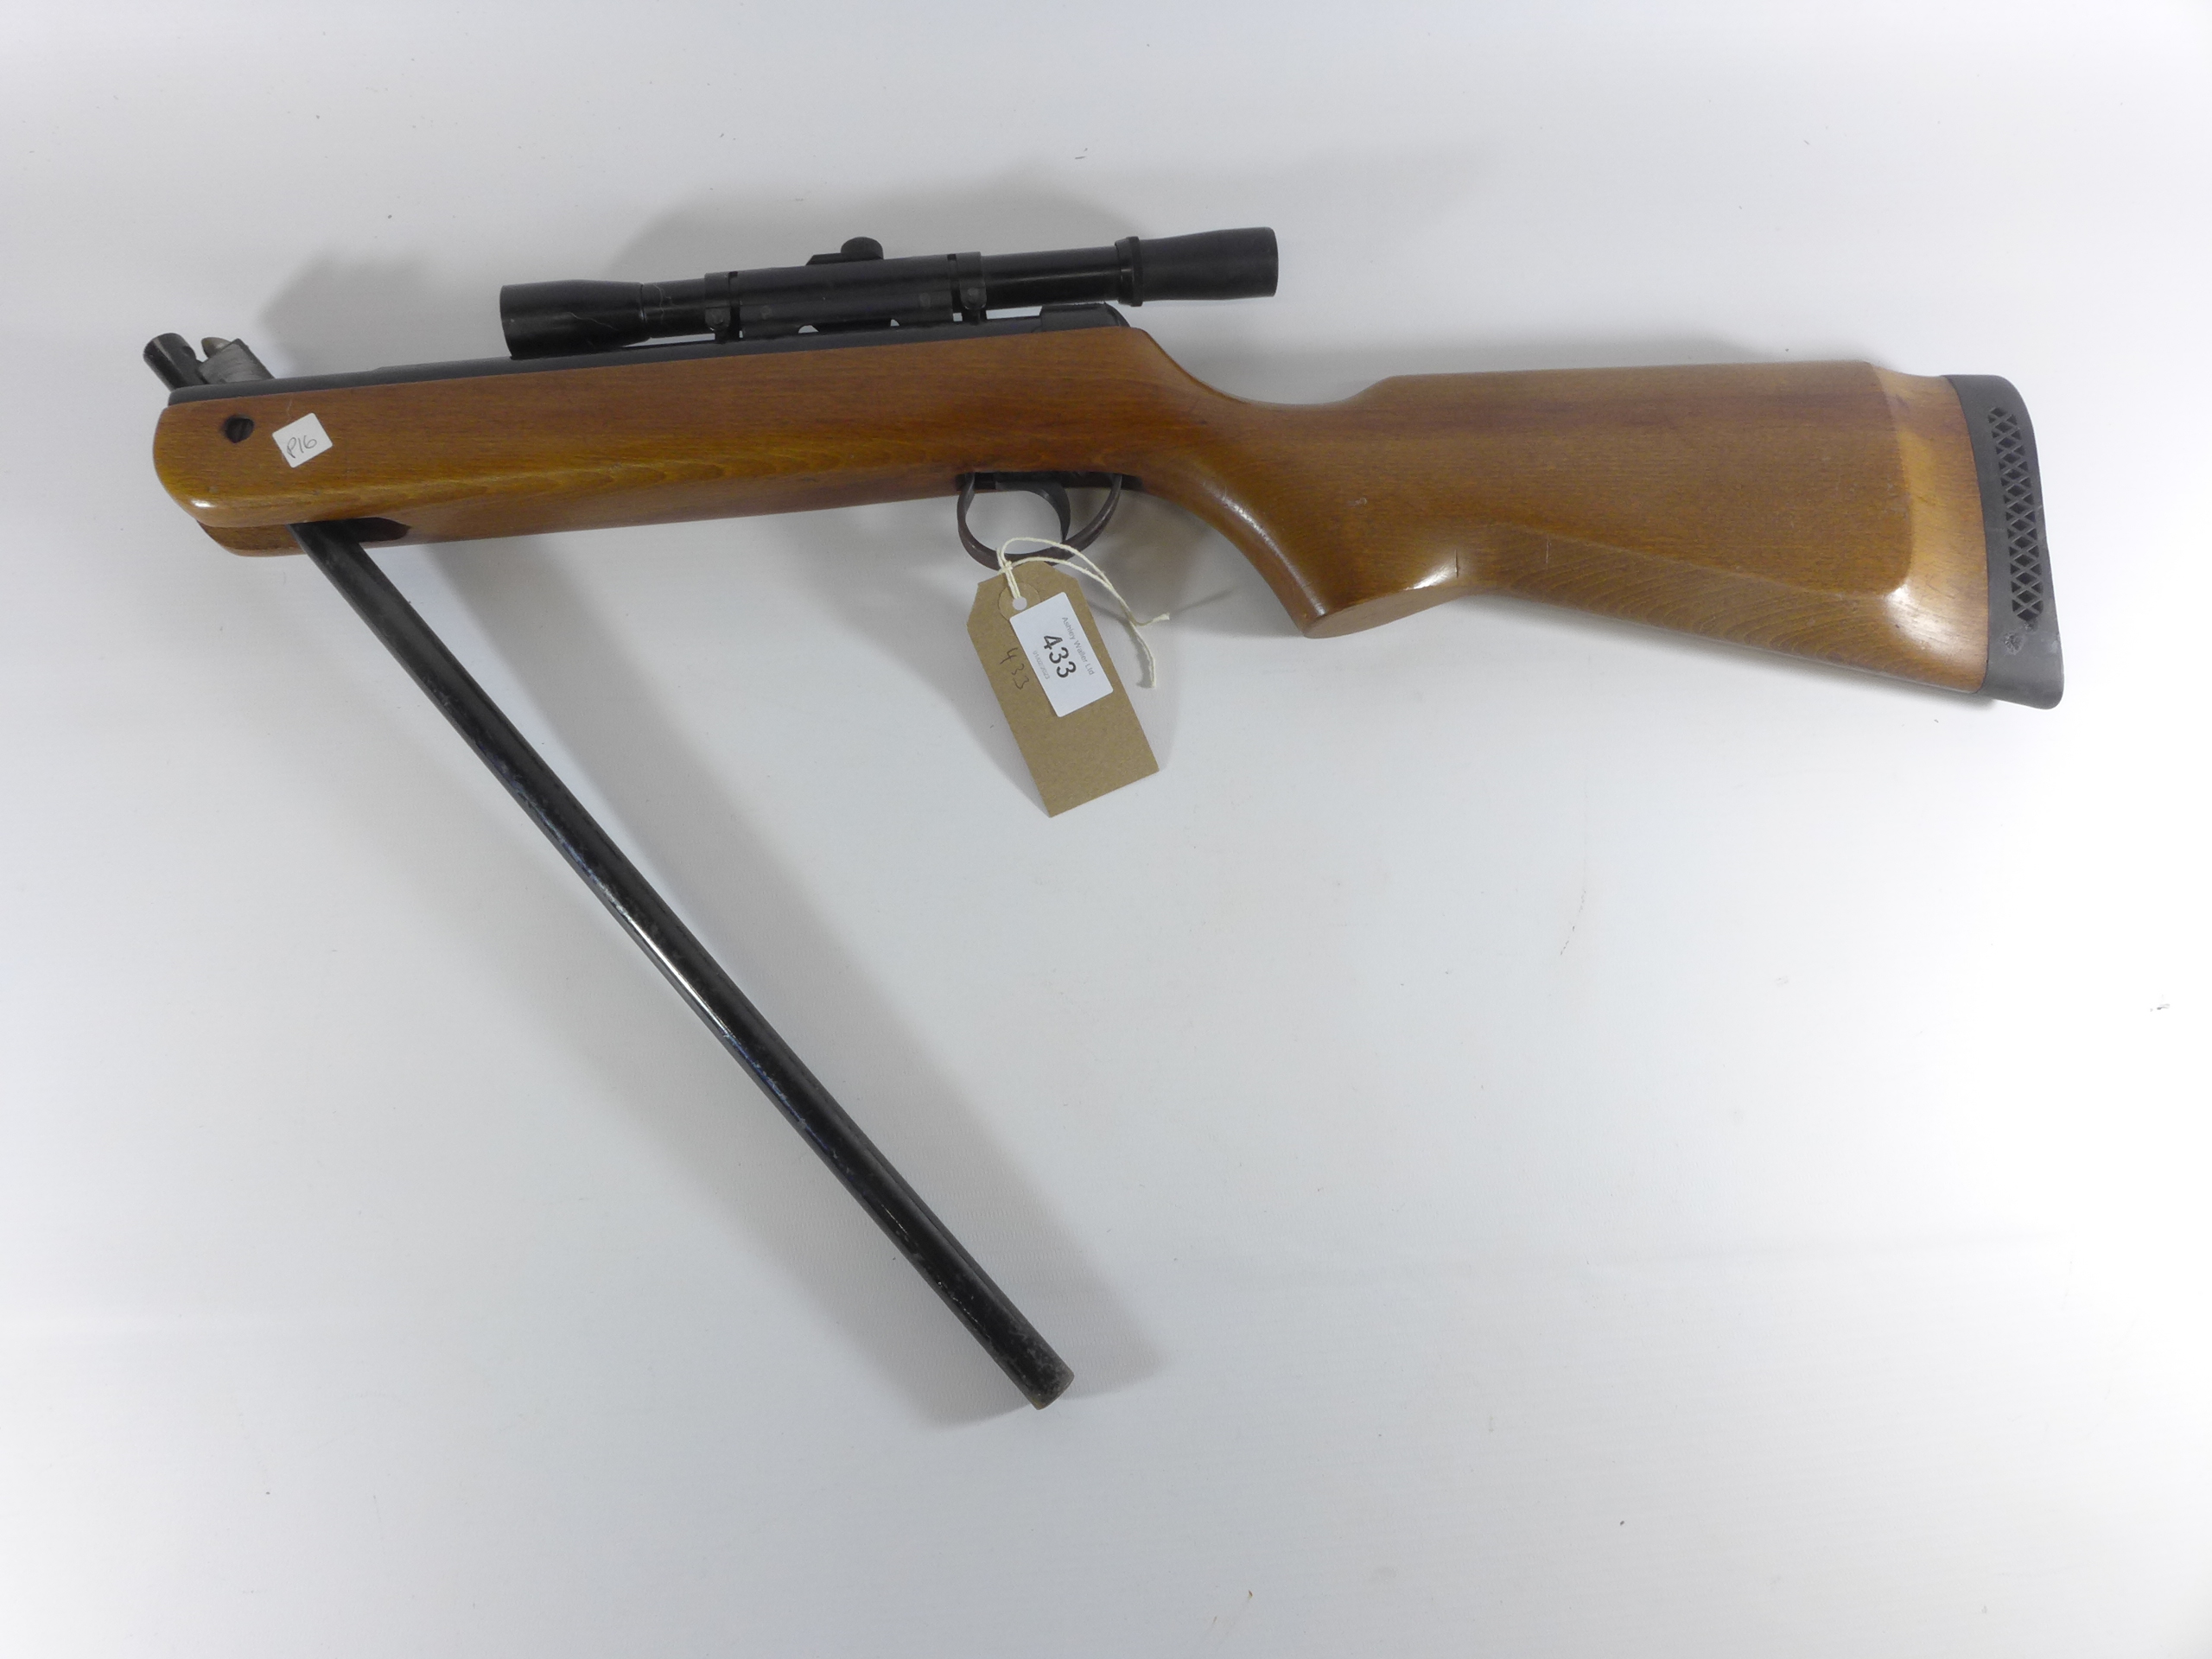 A BSA METEOR .22 CALIBRE AIR RIFLE, 47CM BARREL, WITH TELESCOPIC SIGHTS - Image 4 of 4